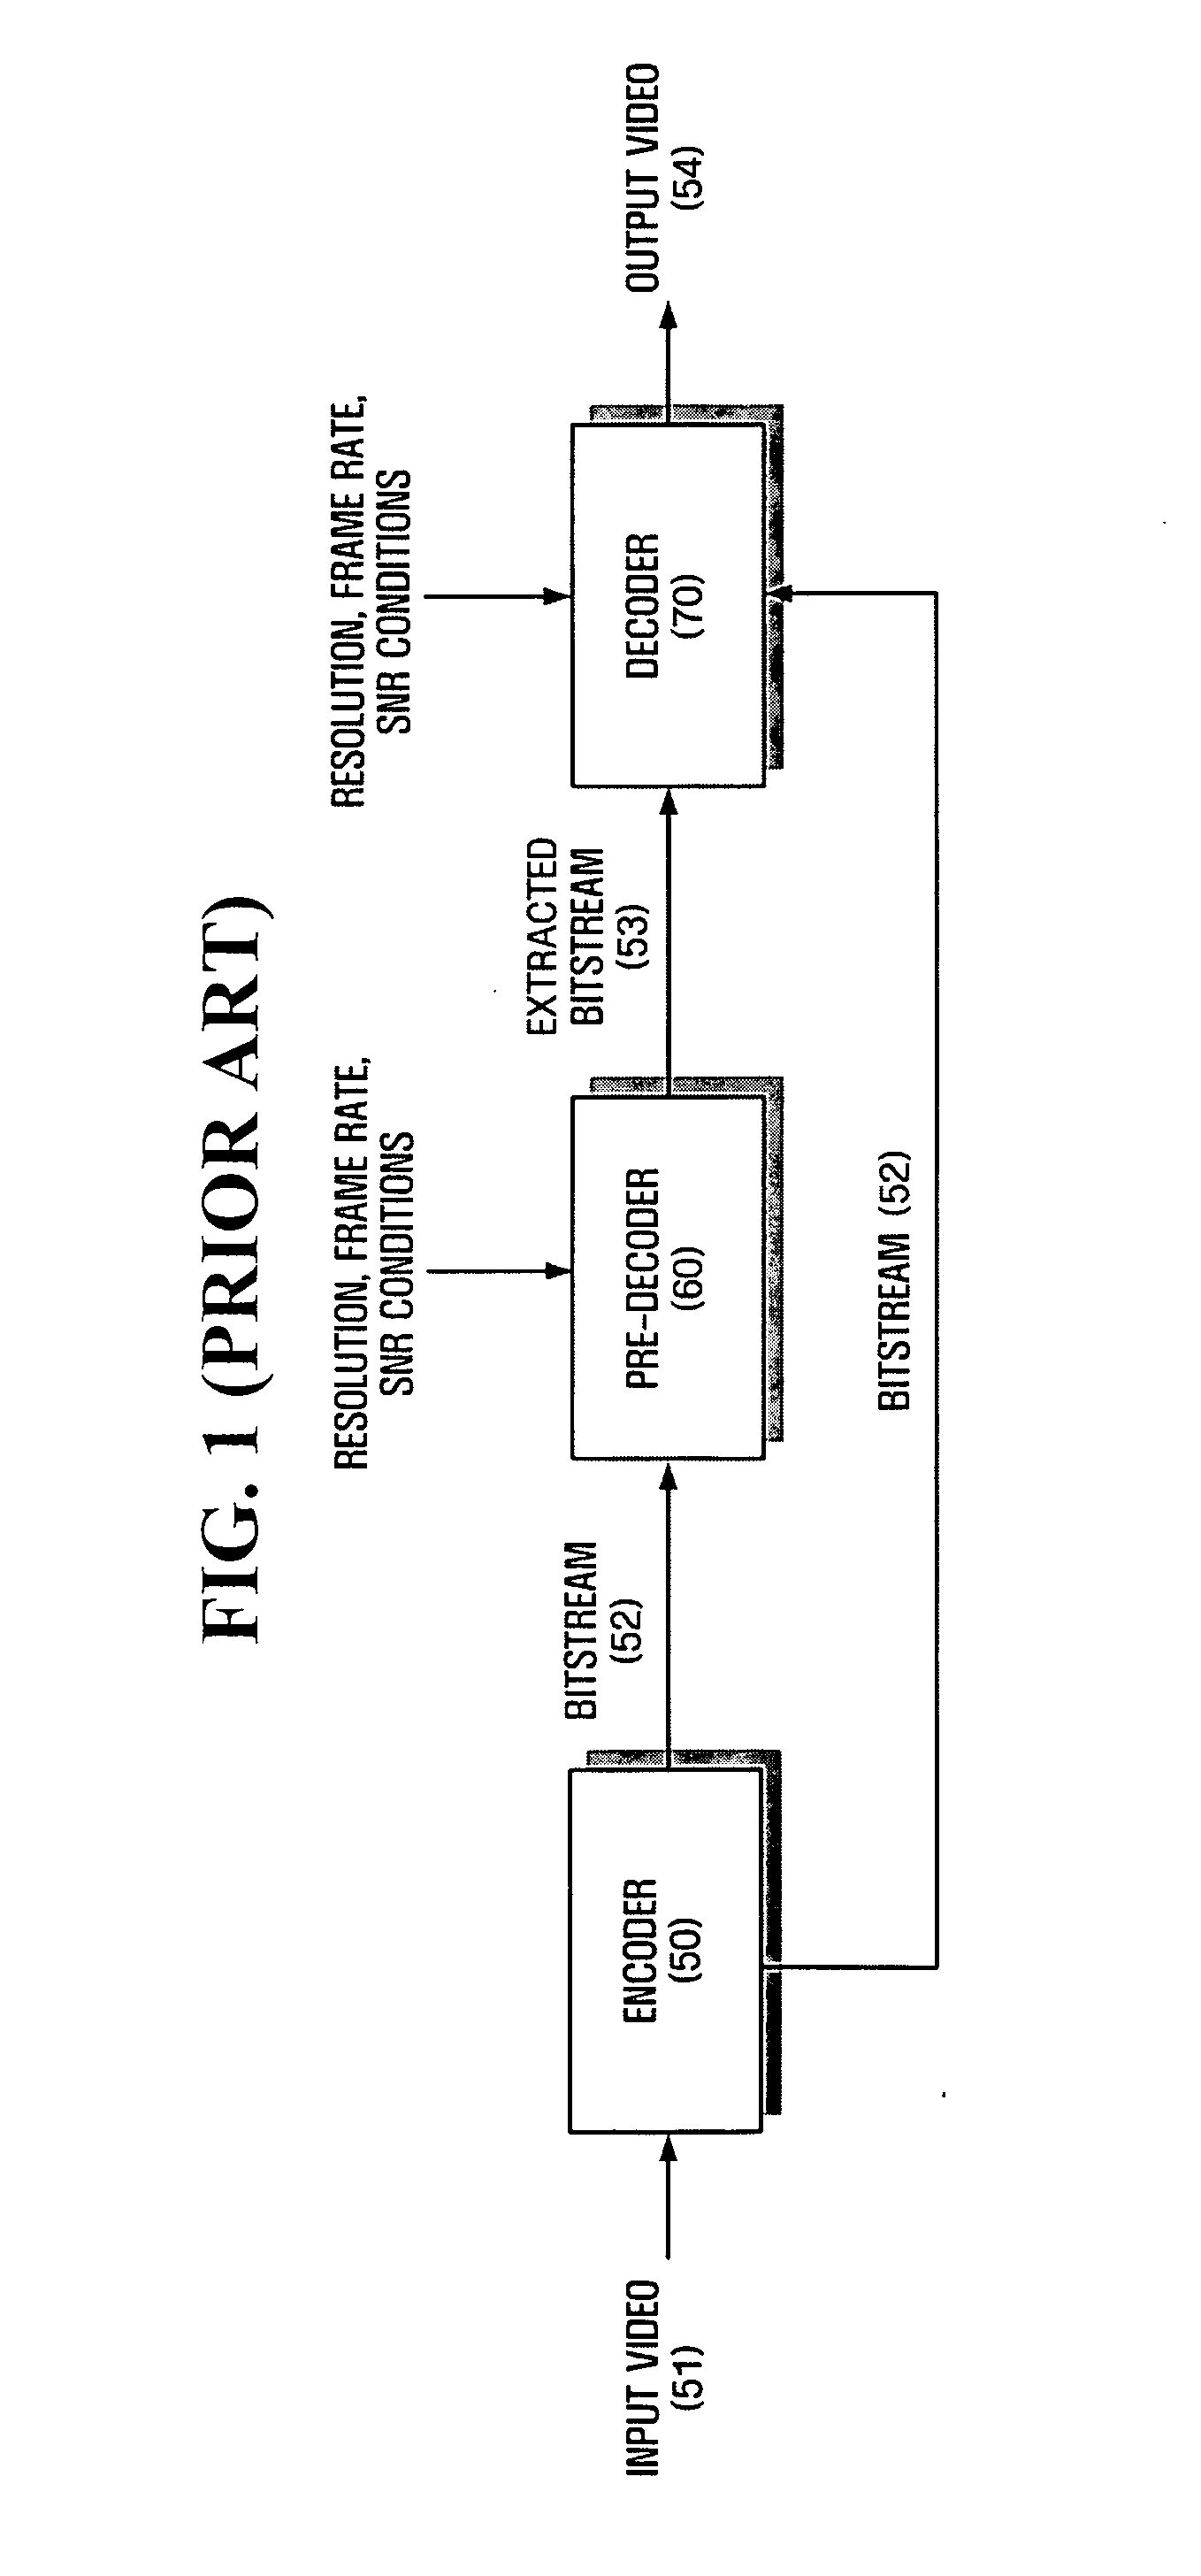 Method and apparatus for effectively compressing motion vectors in video coder based on multi-layer